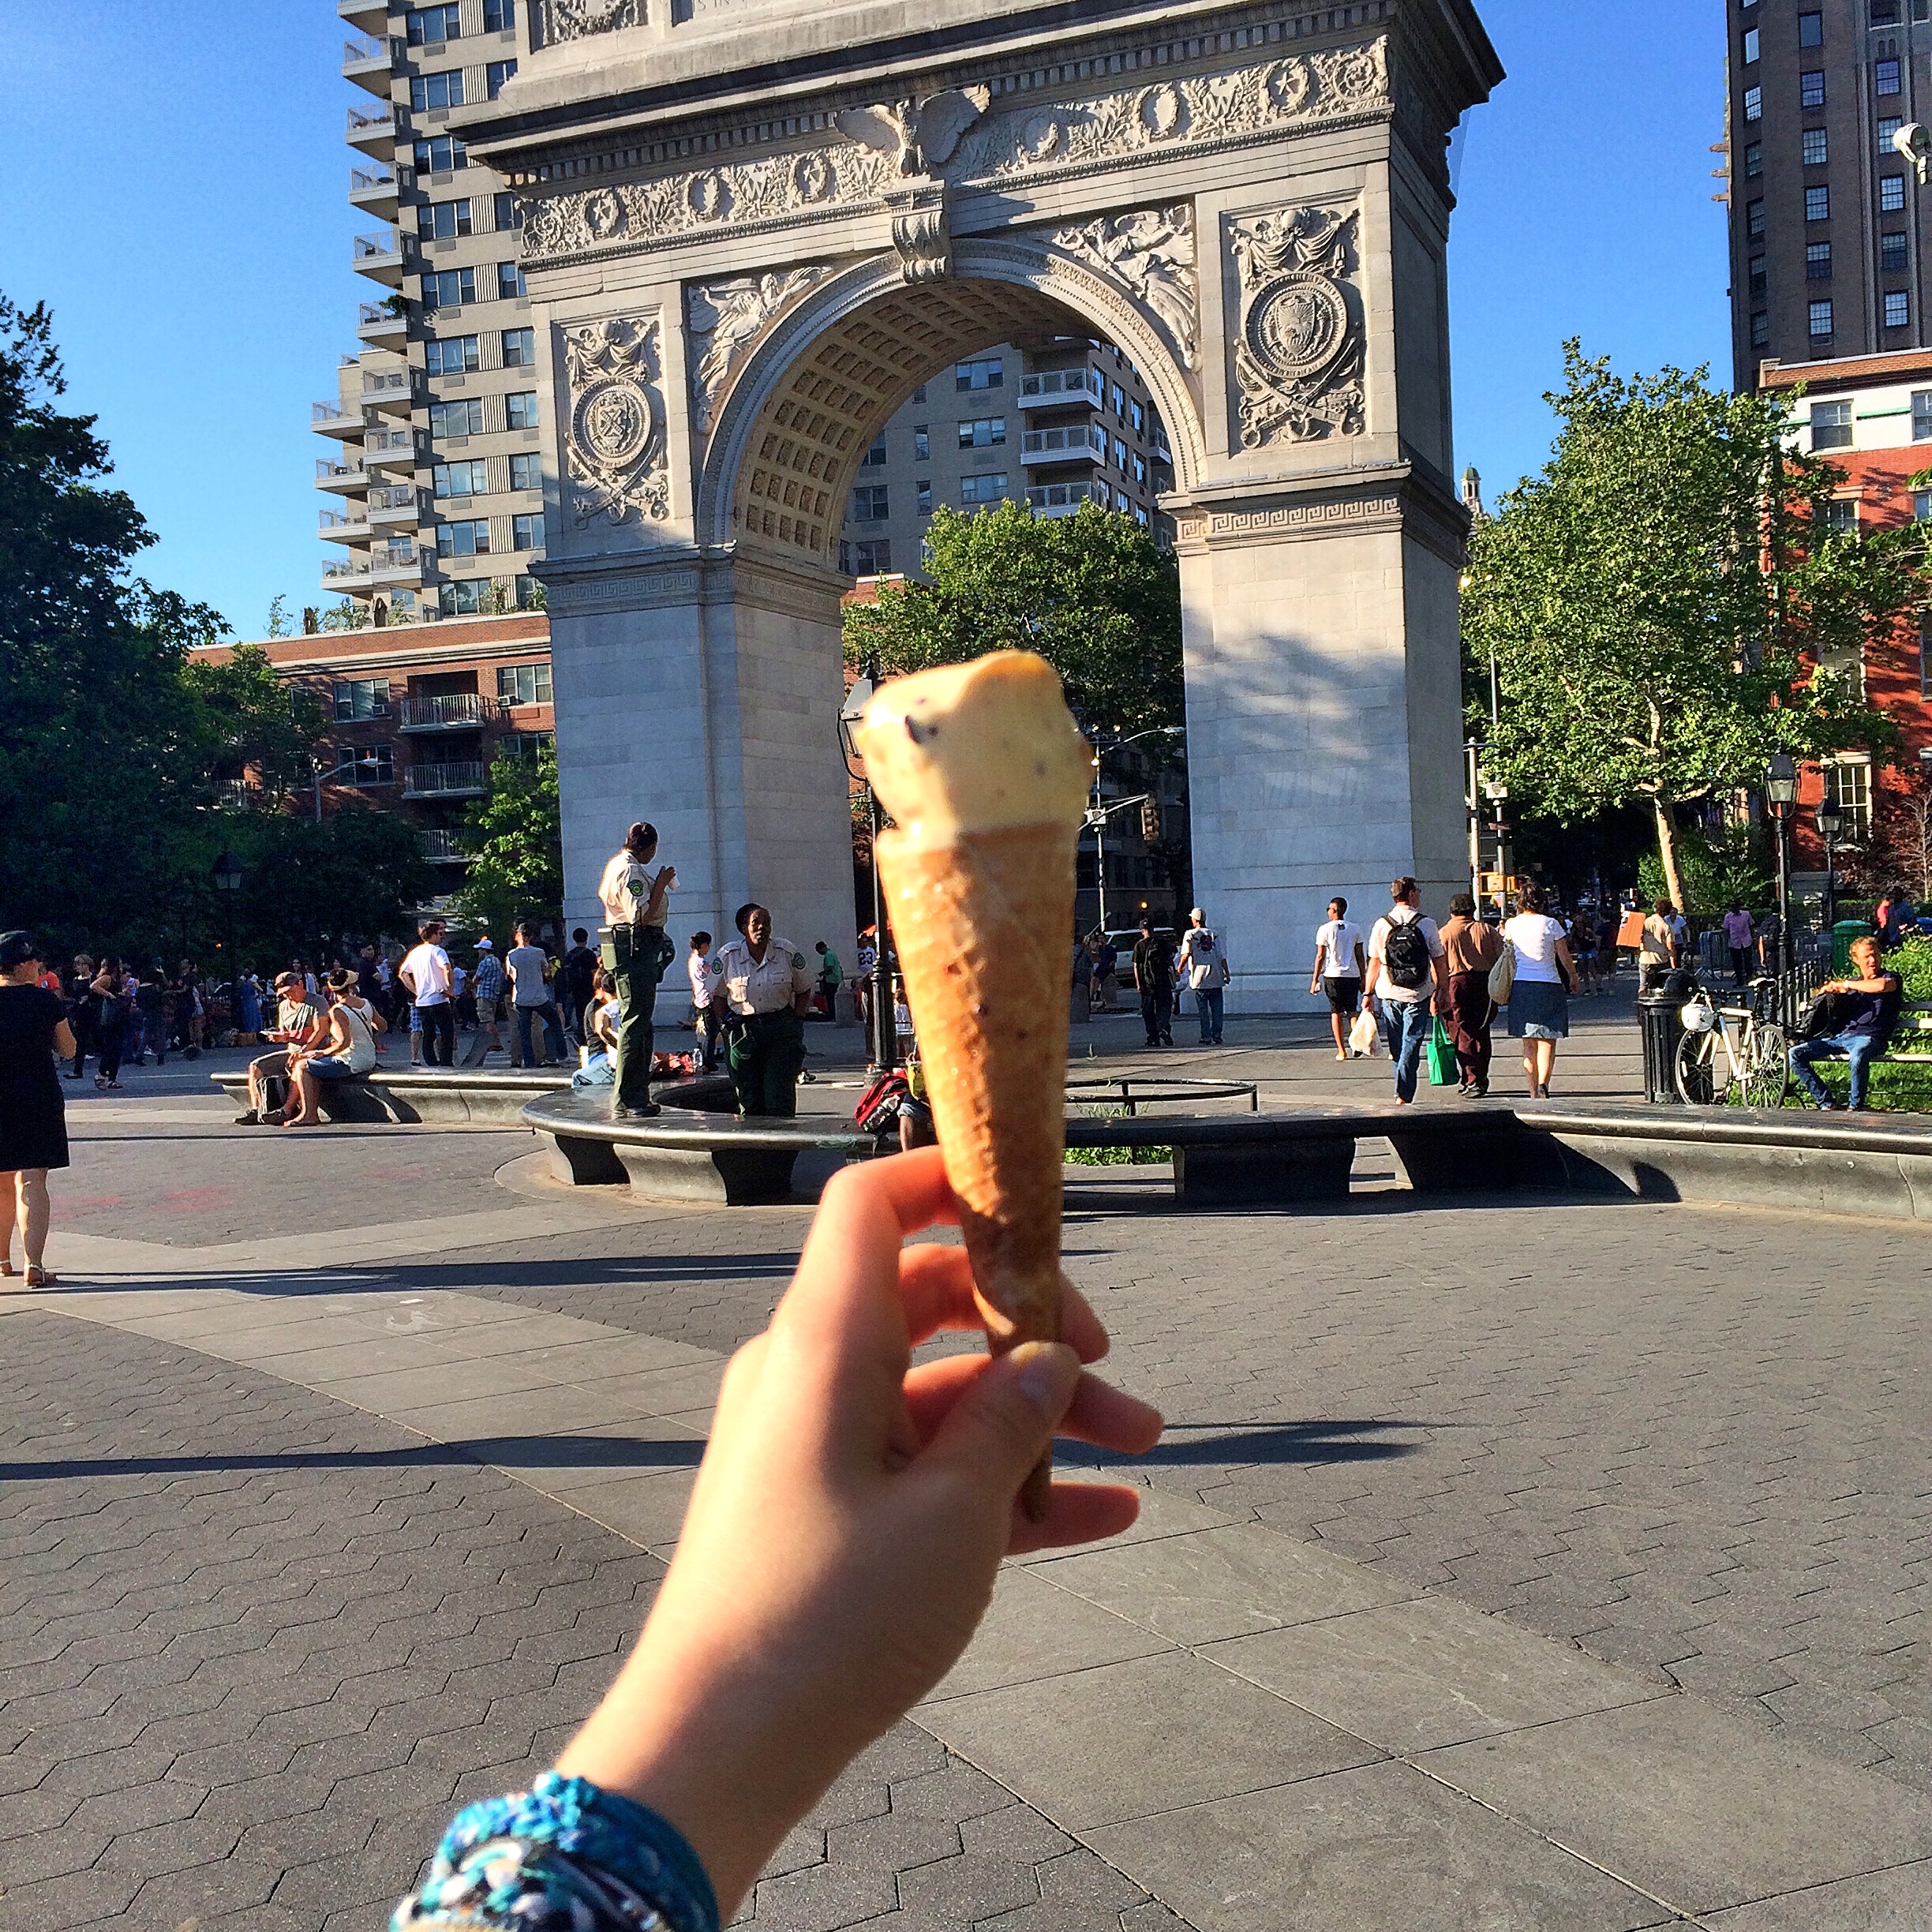 New York's best ice cream shops: Where to find them